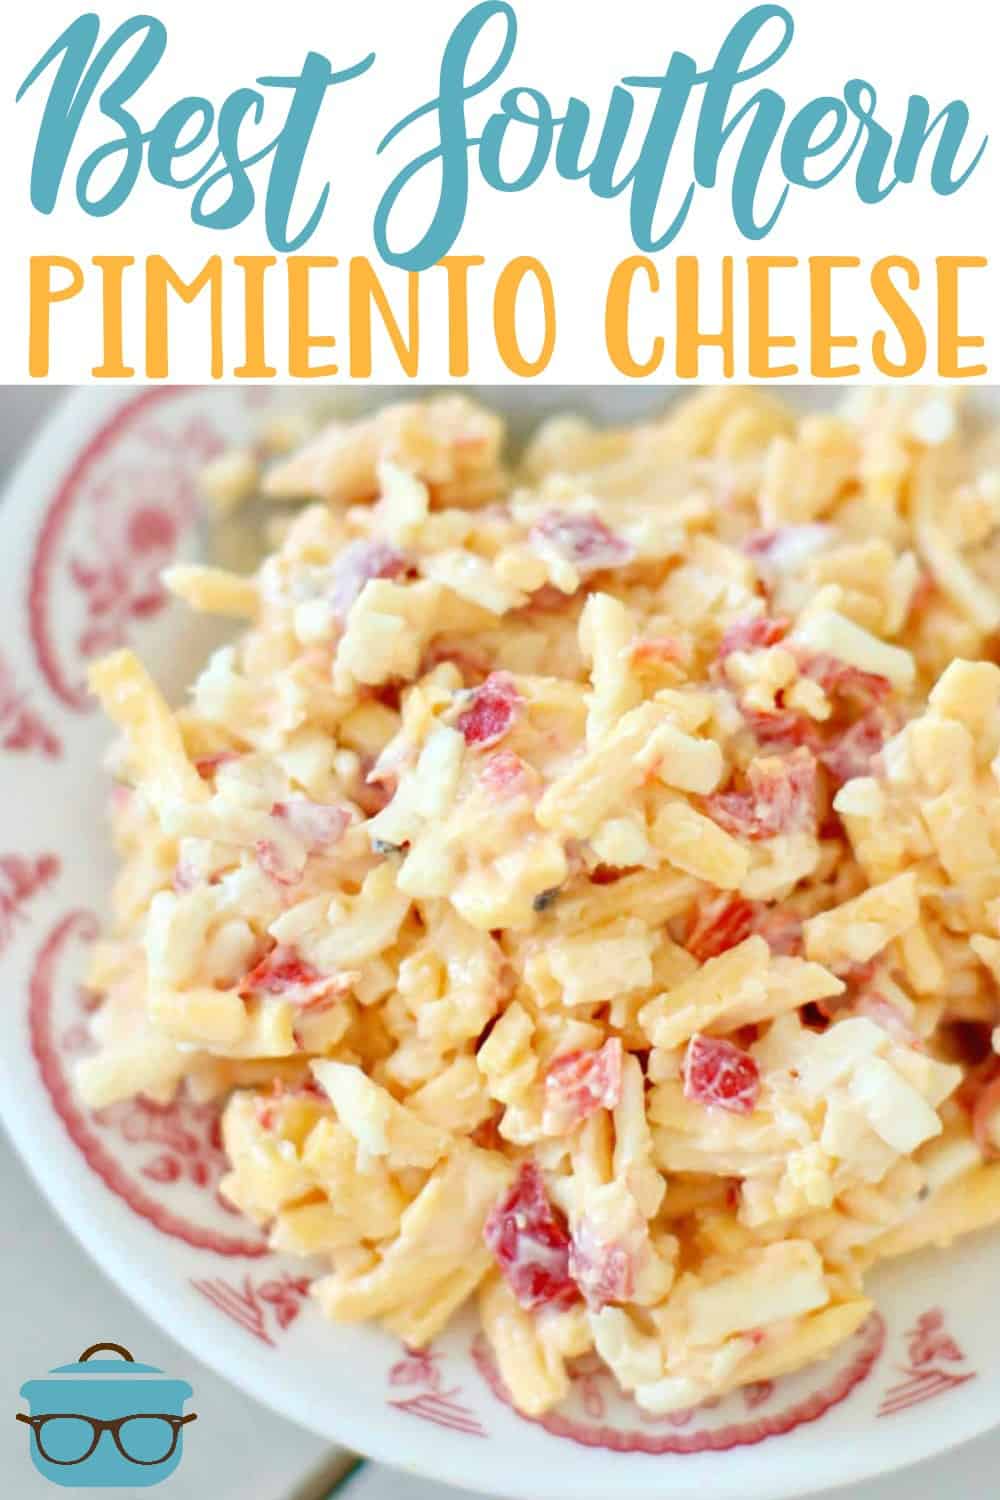 The Best Southern Pimiento Cheese recipe from The Country Cook shown close up on a read and white round plate. 